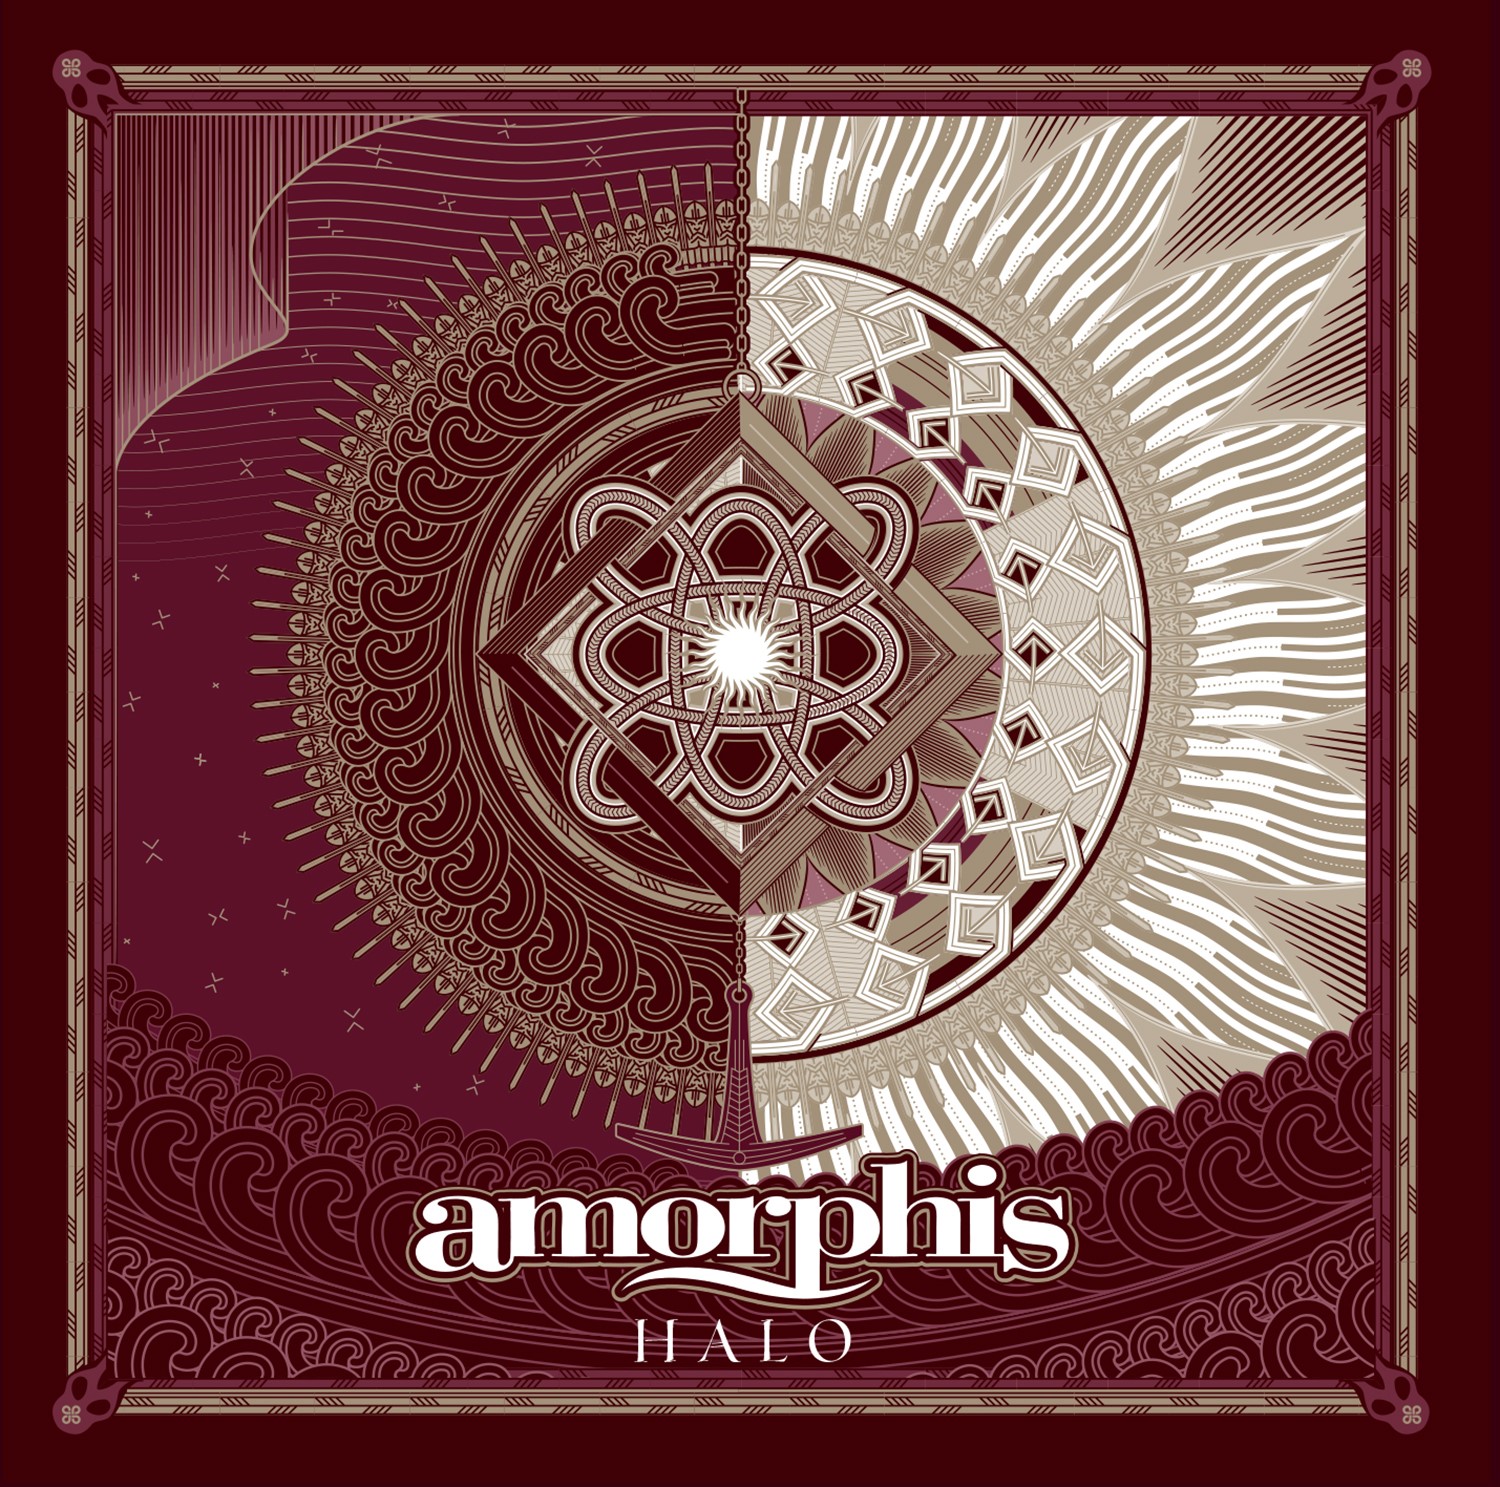 AMORPHIS release new song ‘The Well’ and Tour Edition of “Halo